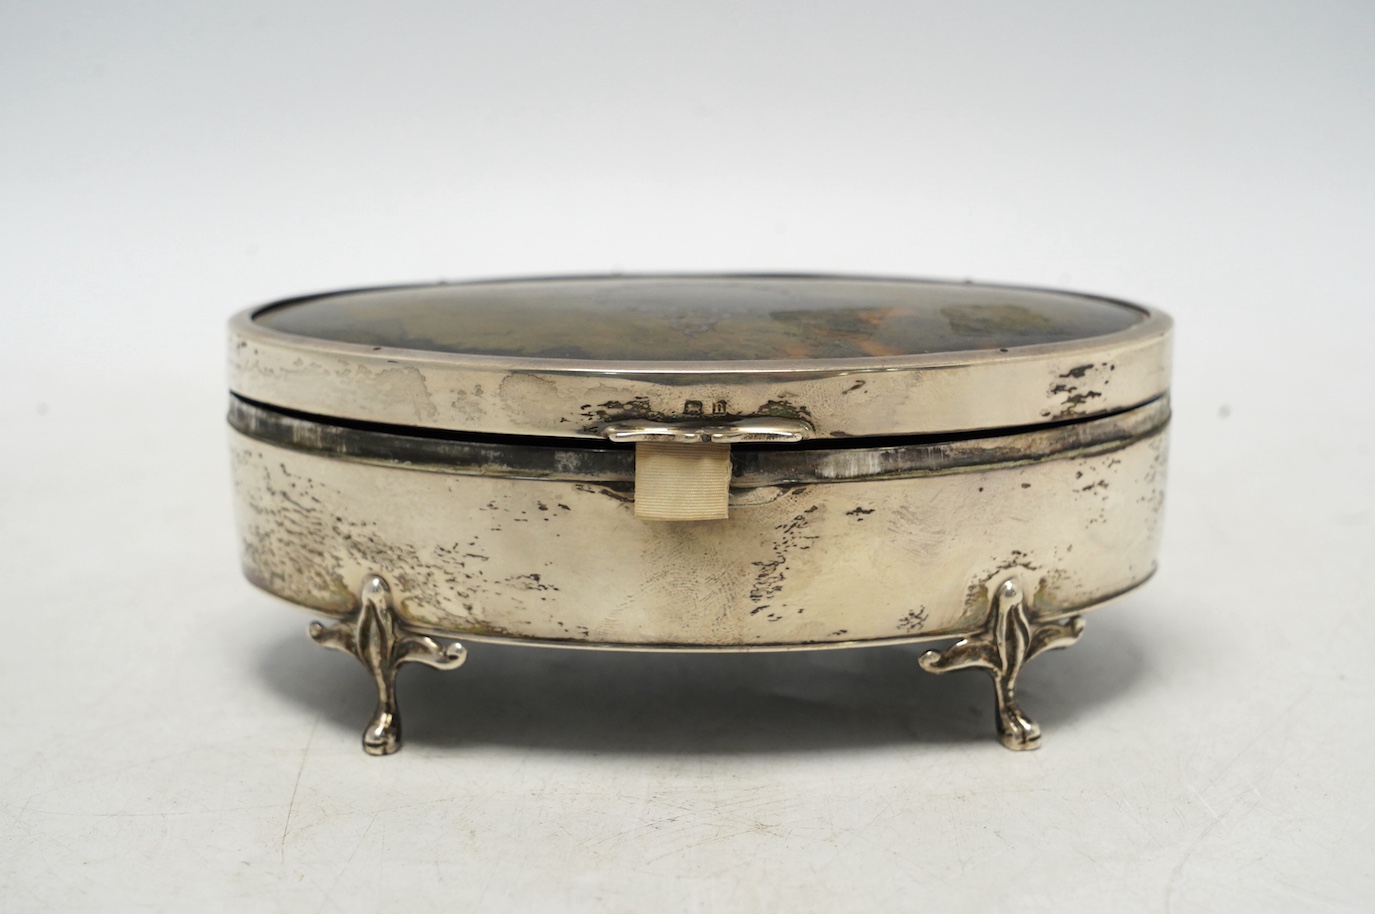 A George V silver and tortoiseshell mounted oval manicure box, E.S. Barnsley & Co Ltd, Birmingham, 1912, 13.5cm, incomplete. Condition - poor